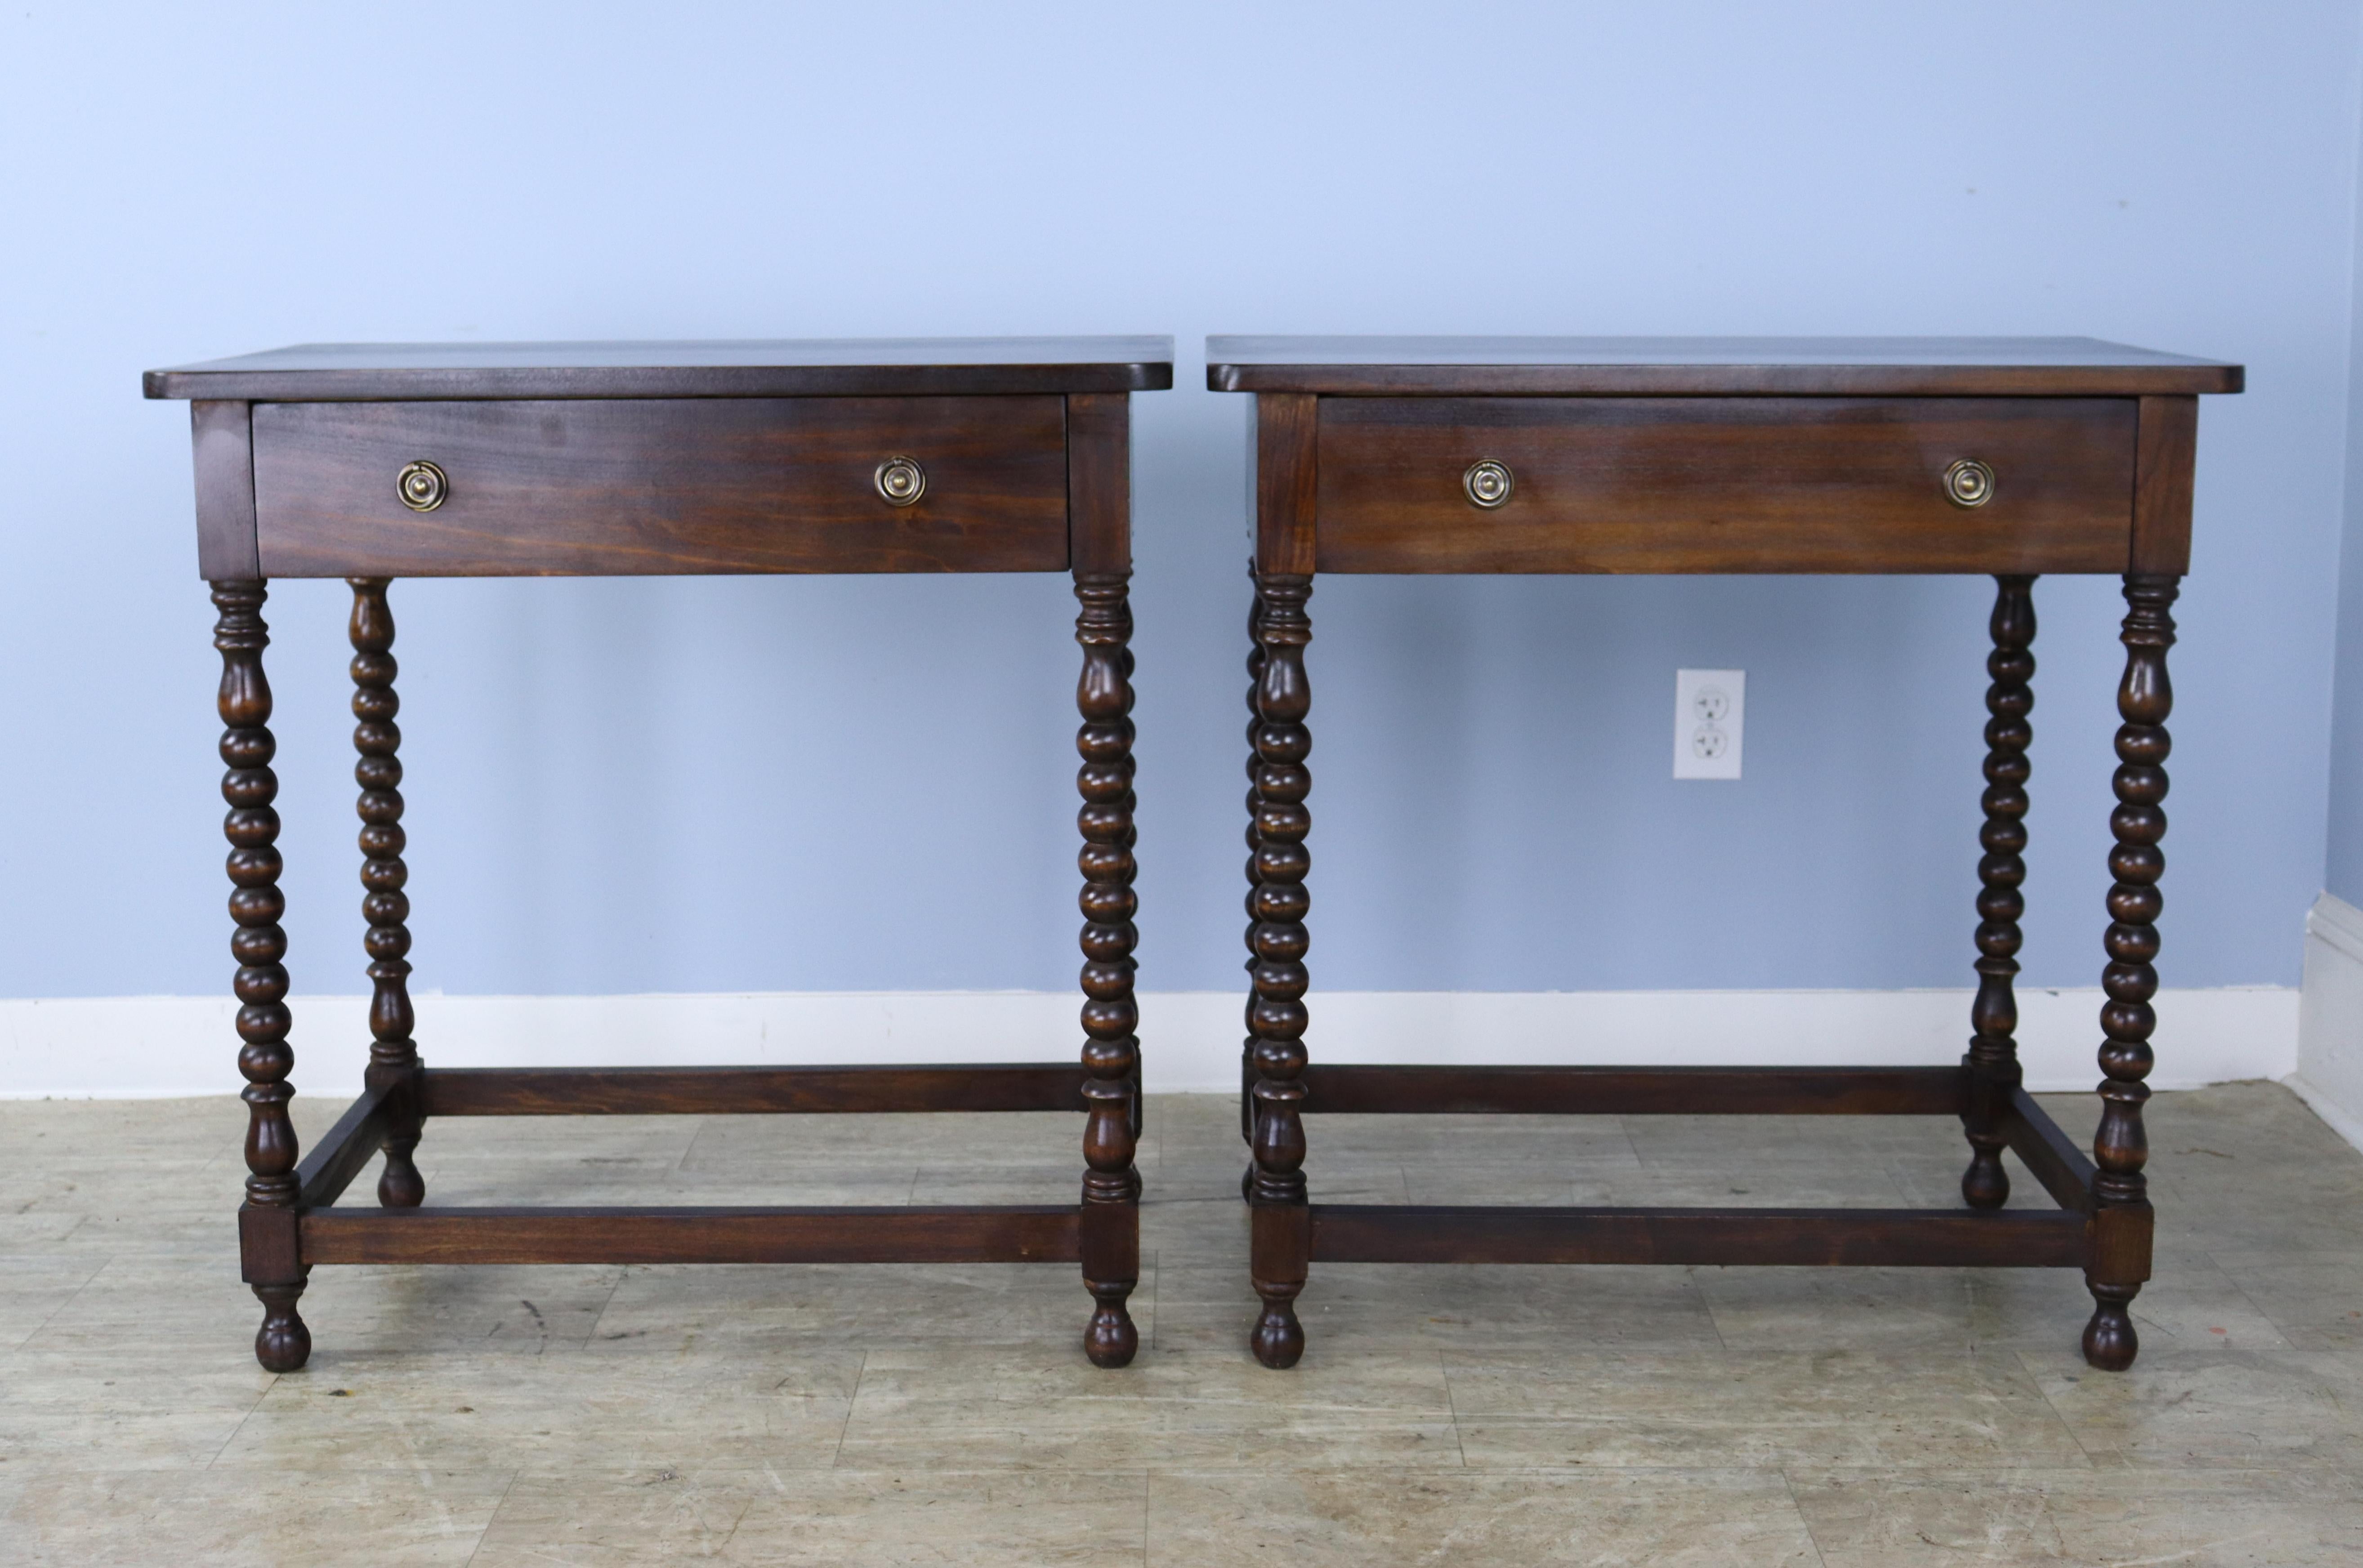 A pair of walnut side tables or nightstands with eye-catching bobbin turned legs and straight stretchers. Each table has a single roomy drawer. The tops are in good condition with lovely color and grain. Would be right on either side of a sofa or in